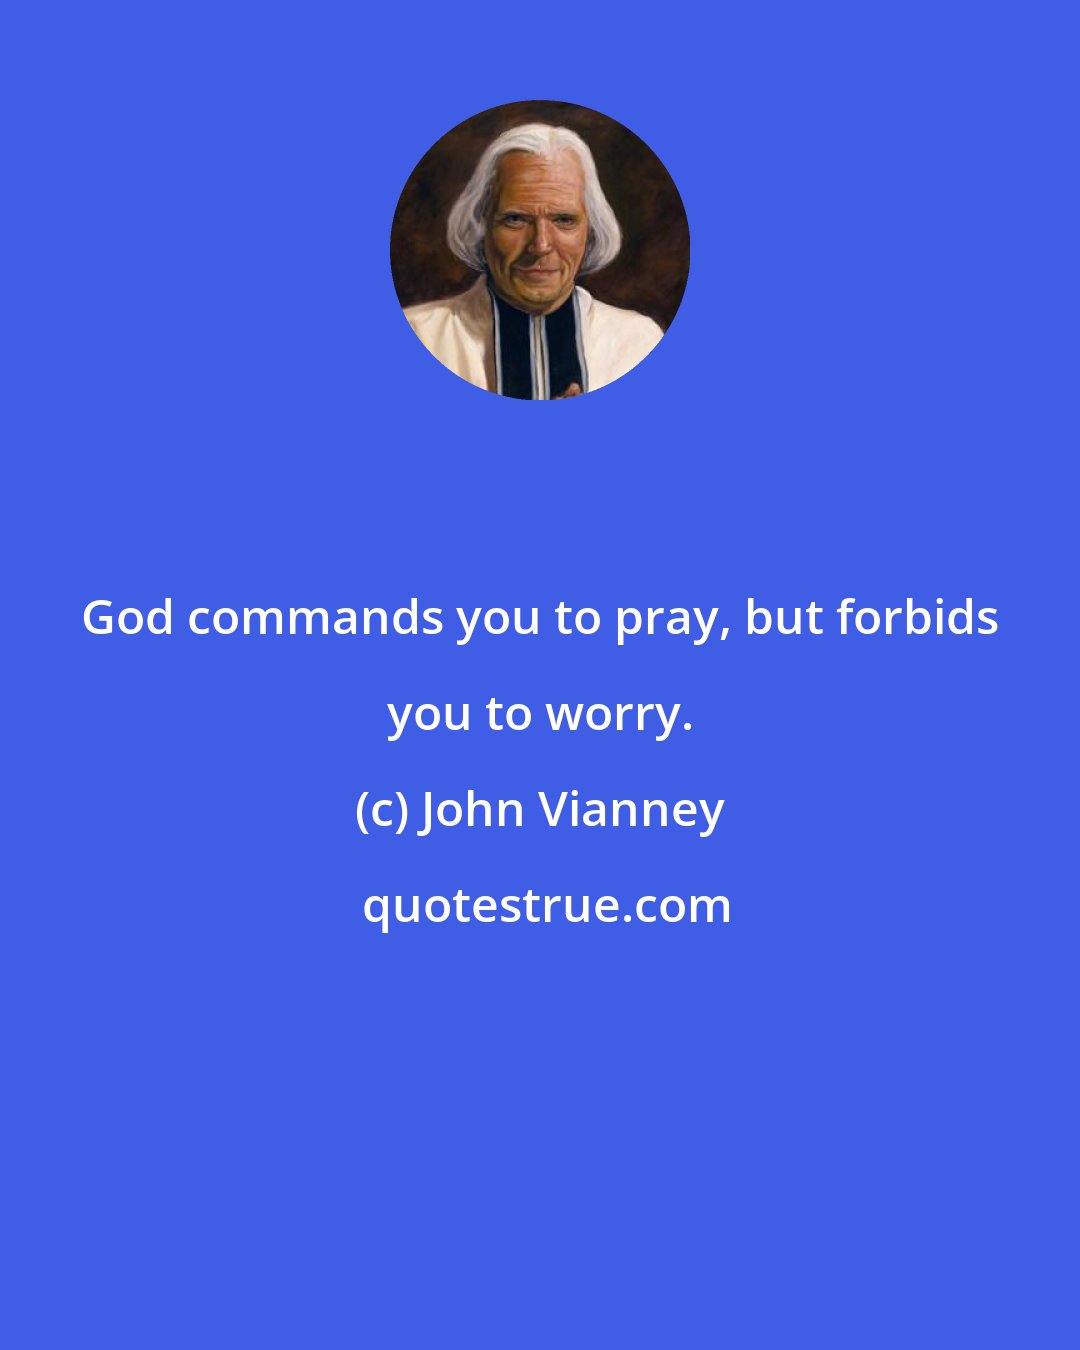 John Vianney: God commands you to pray, but forbids you to worry.